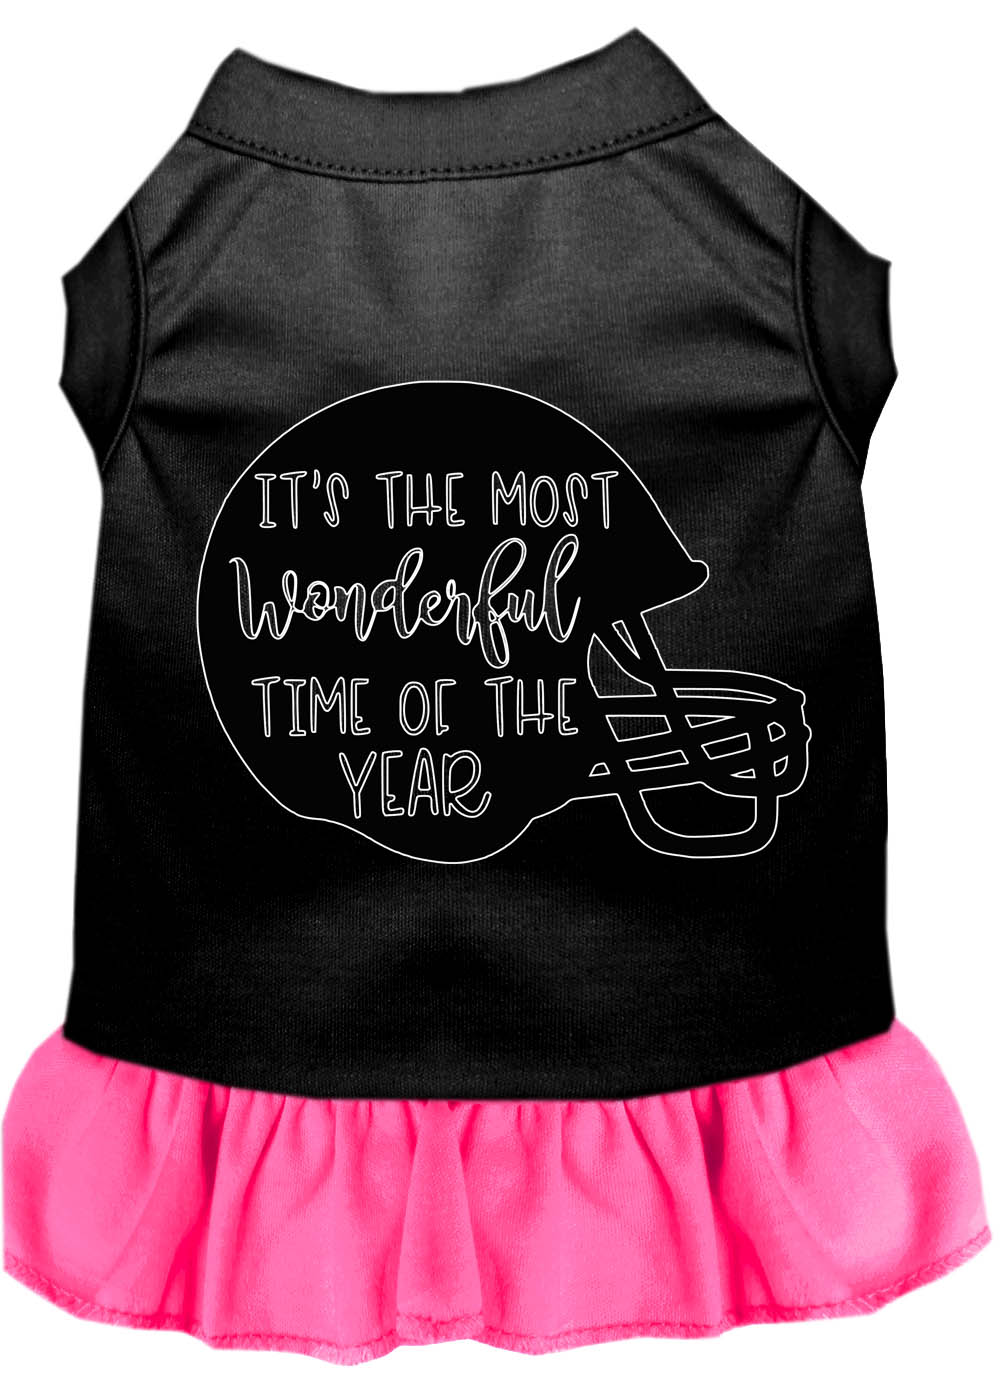 Most Wonderful Time of the Year (Football) Screen Print Dog Dress Black with Bright Pink Med